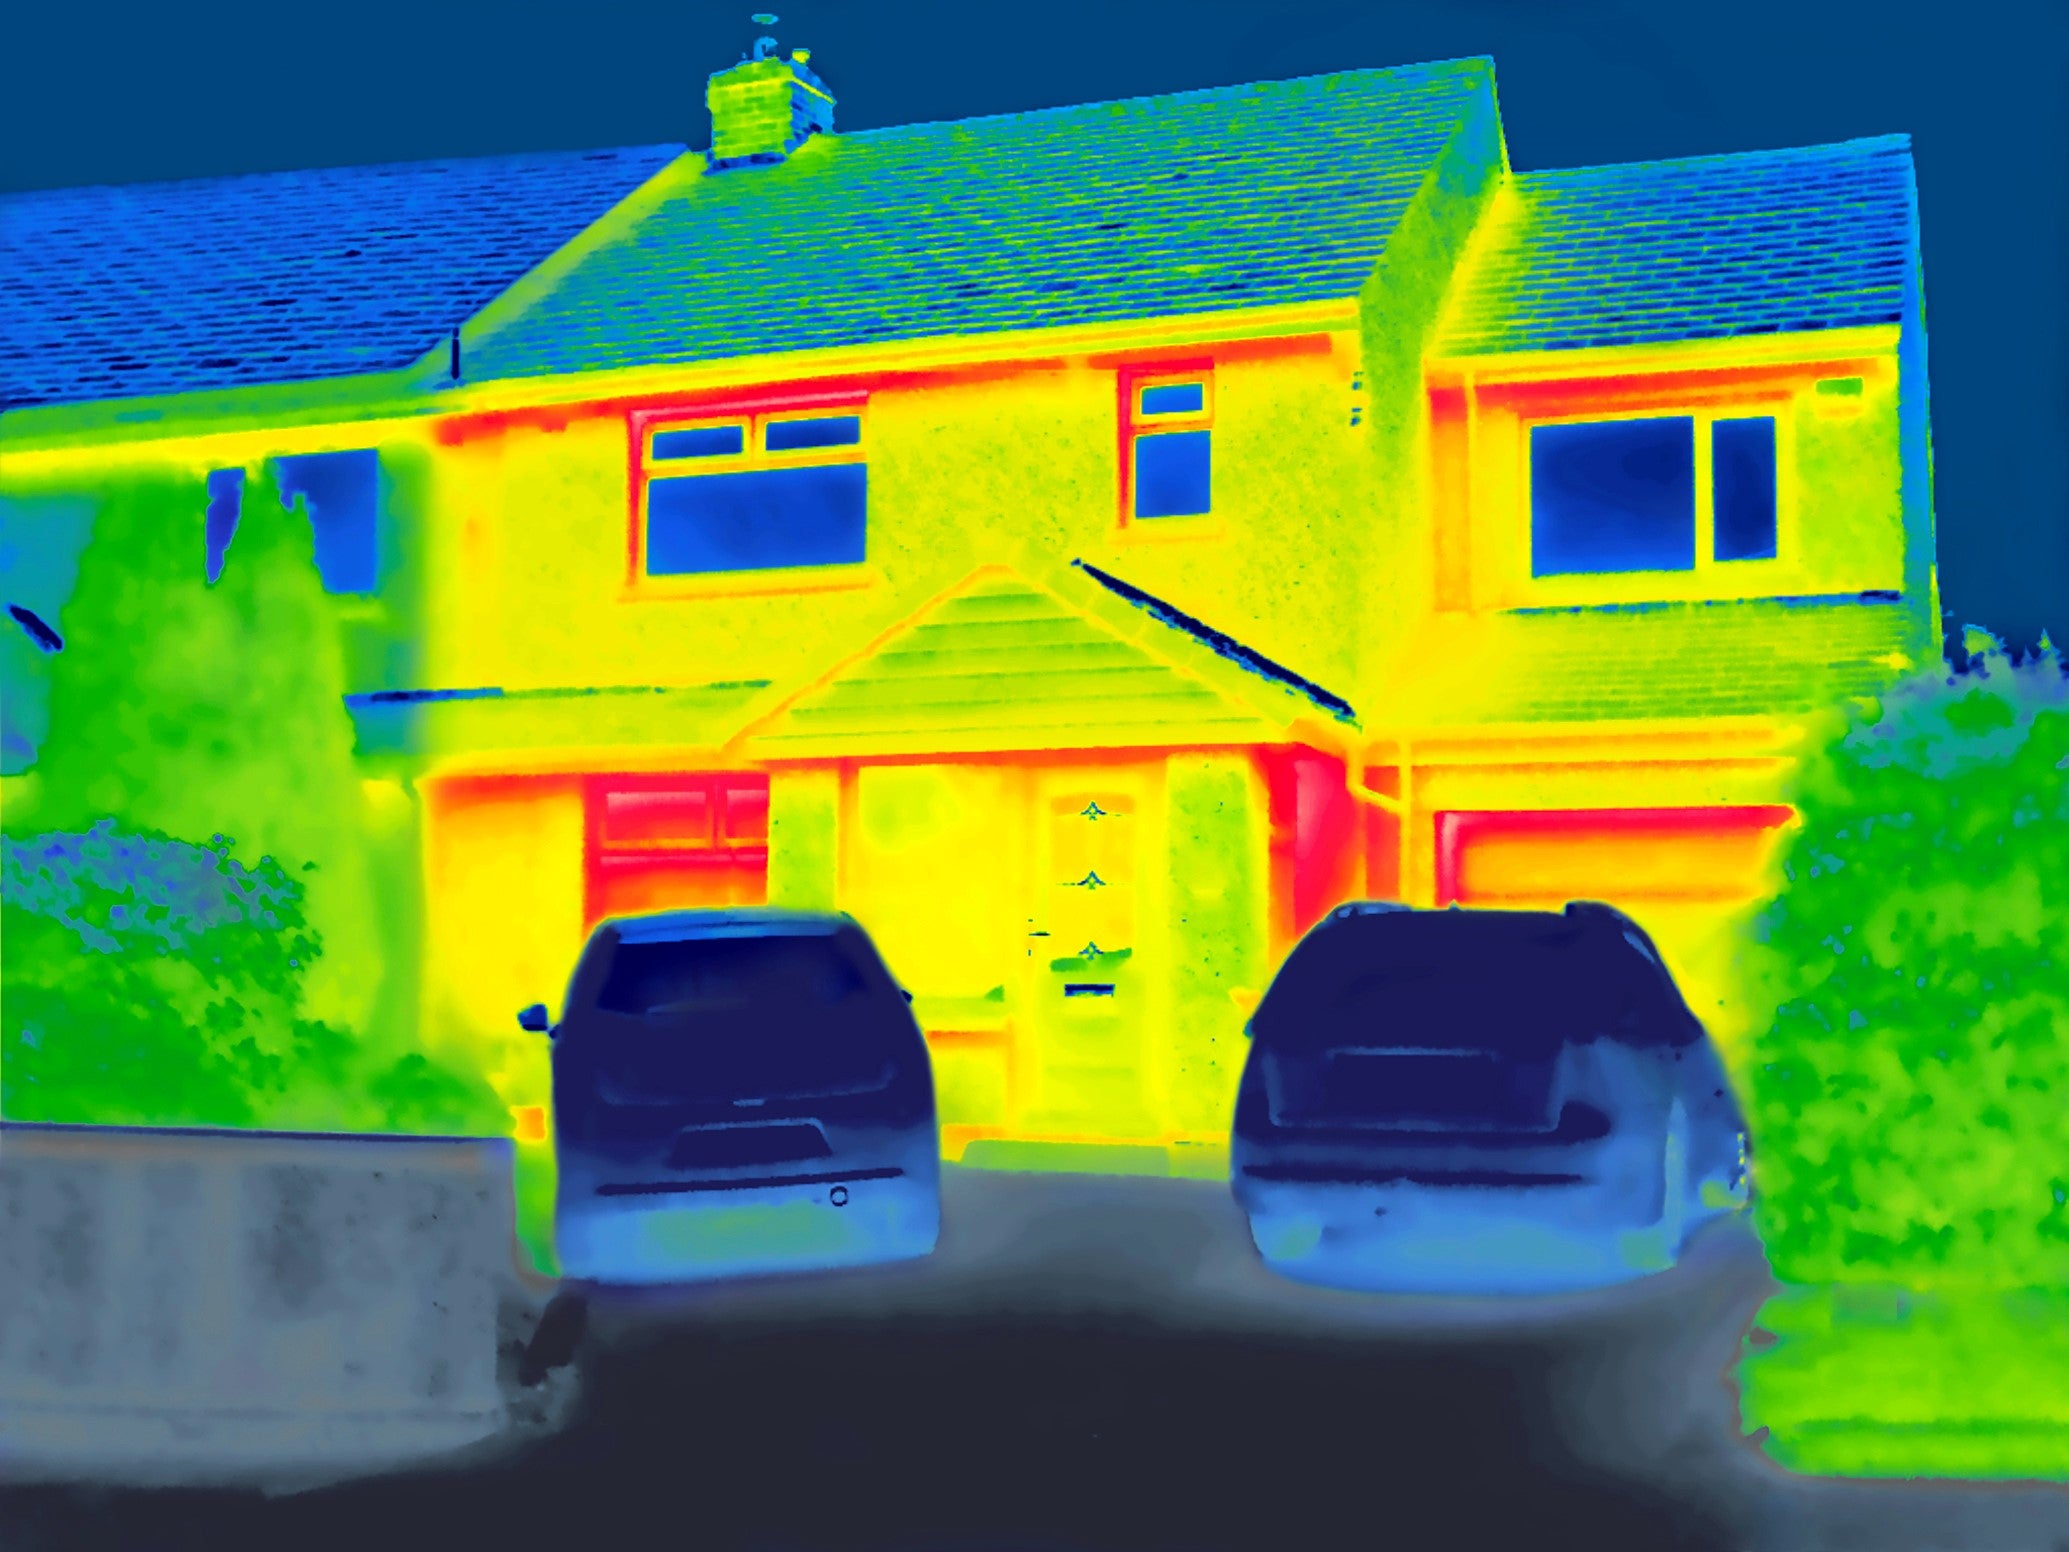 By not understanding the actual energy performance of their homes, home owners could be paying hundreds of pounds in wasted energy